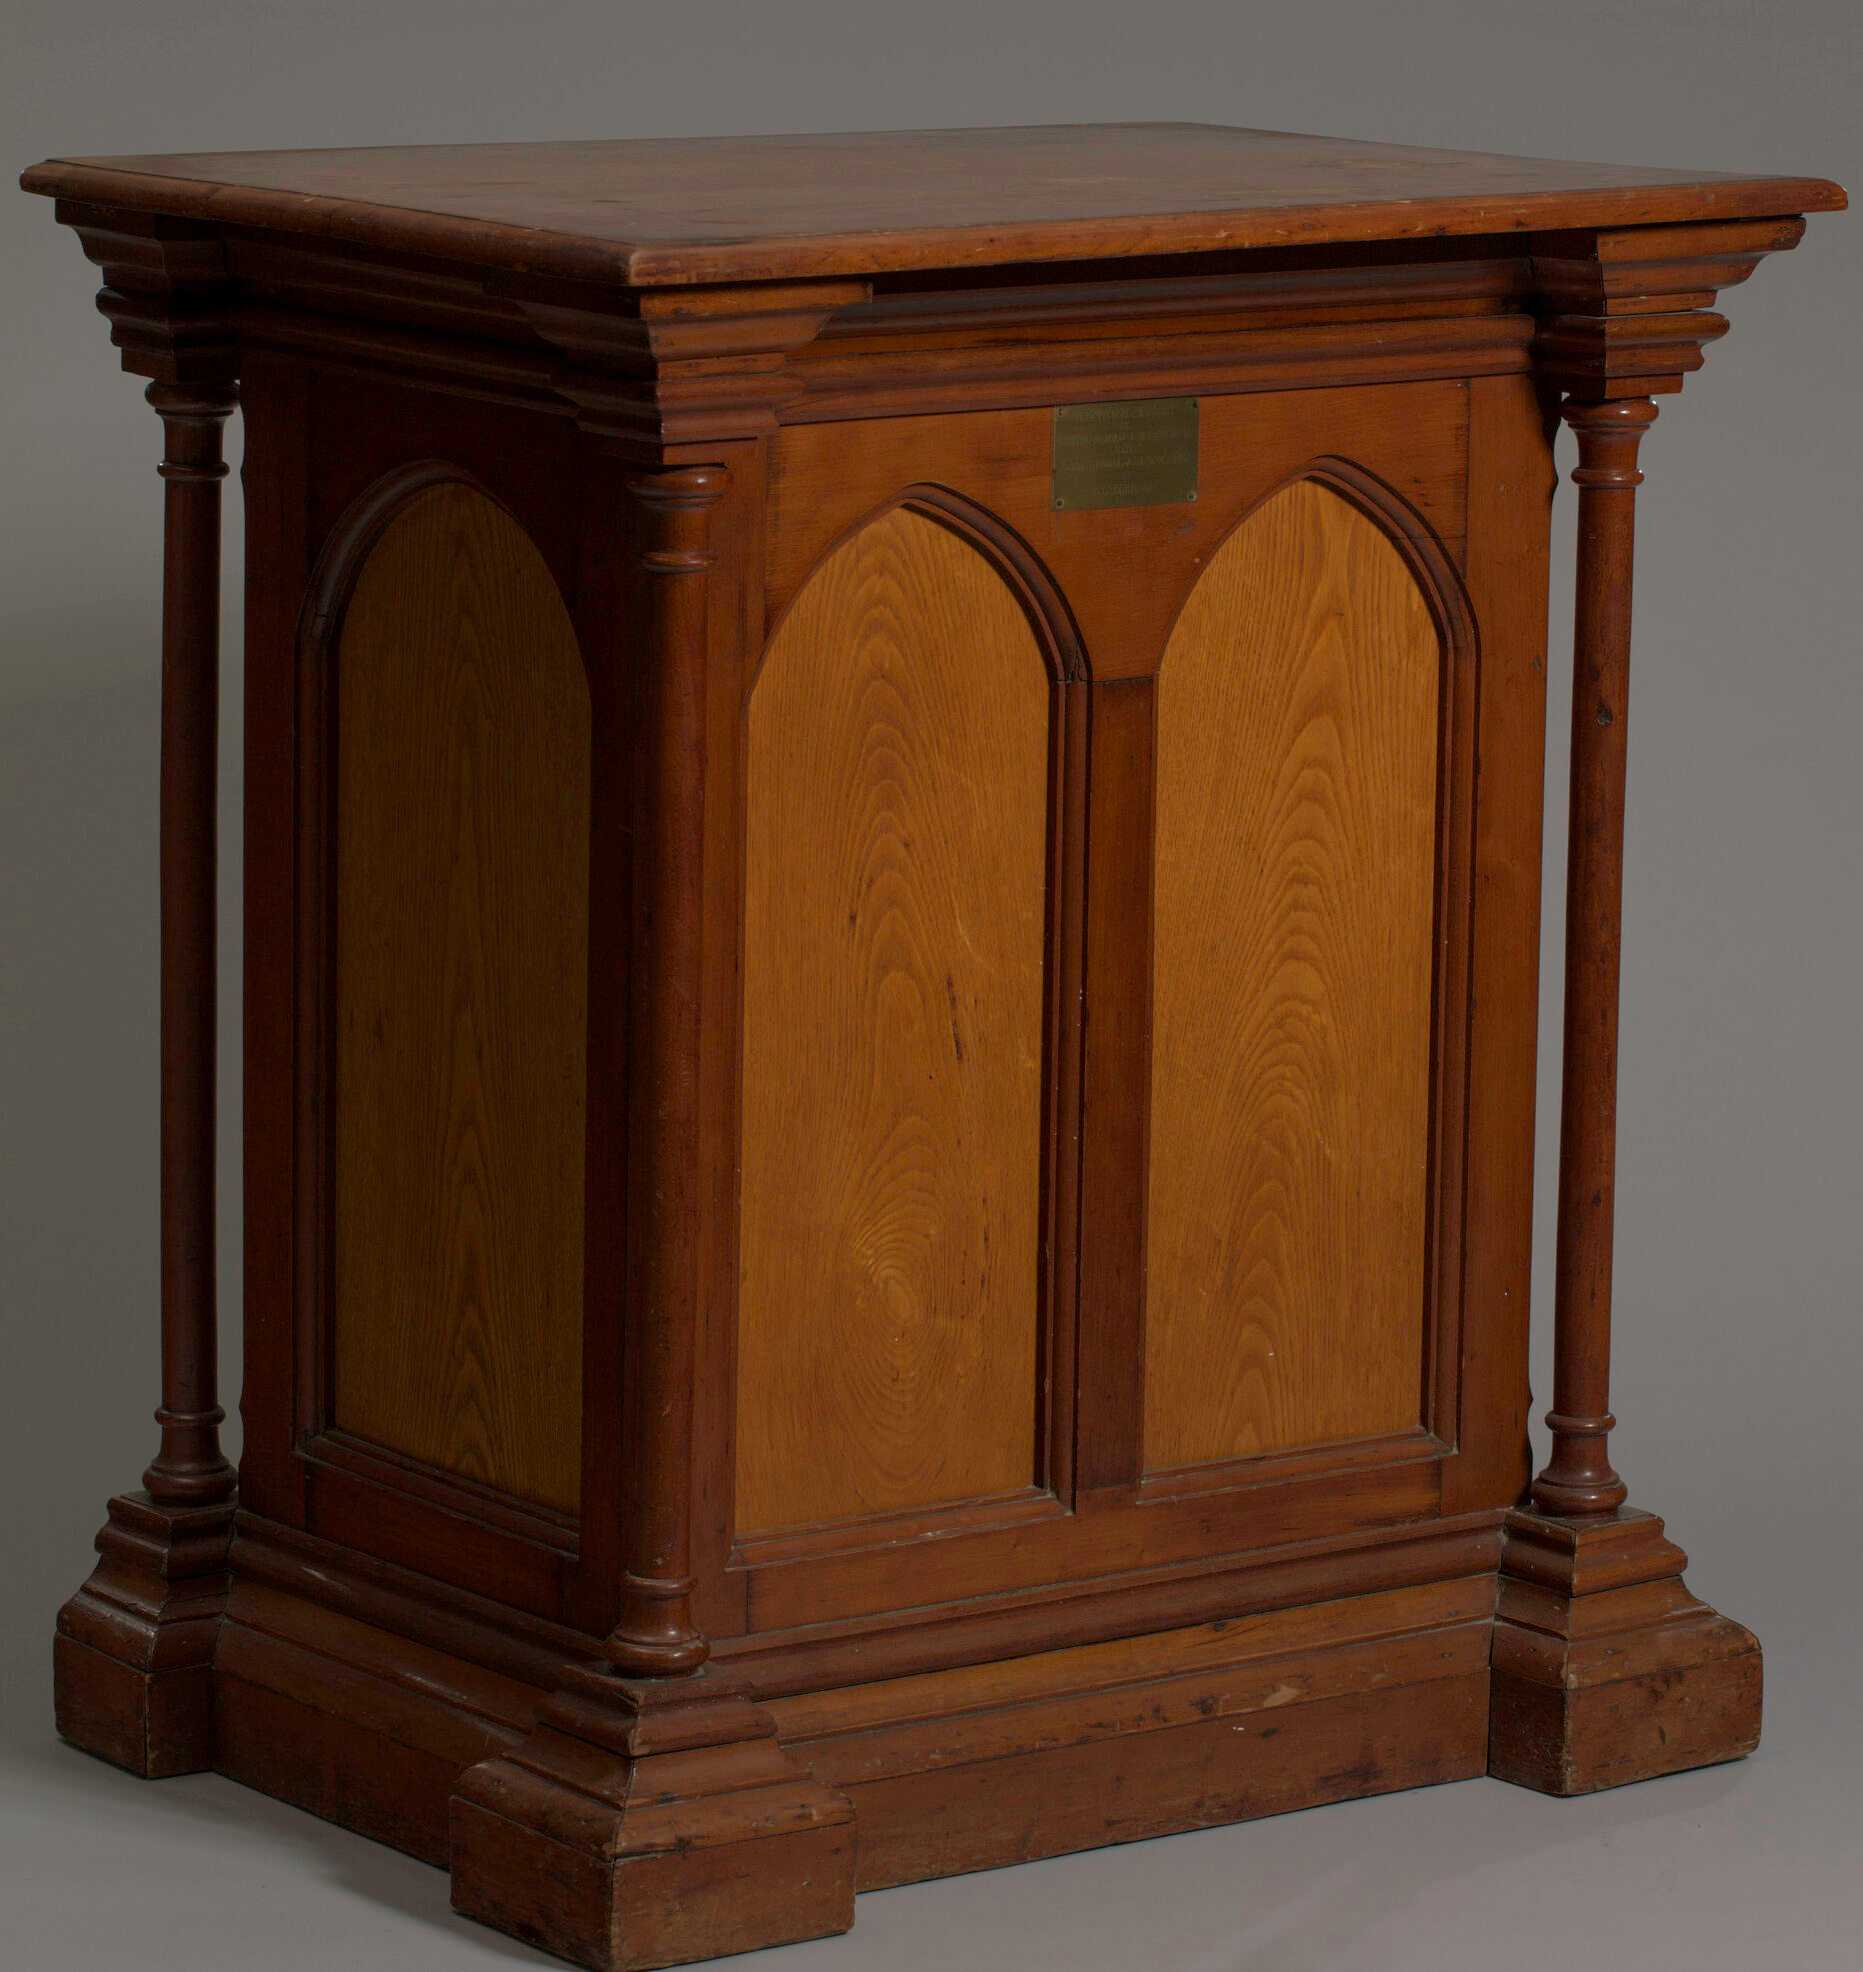 A pulpit from the Metropolitan AME Church, consisting of a hollow, three-sided structure composed of multiple pieces of wood that show different techniques, ages, and varnishes. The front of the pulpit features two arches separated by a piece of wood and framed by thin columns on either side. The wood is smooth and varnished with a light resin through which the wood grain is still visible. The cornices at the top and bottom of the columns are similar in style, with those on the bottom heavier due to extra supporting wood. There are small juts of wood in the interior suggesting a shelf may have been in place inside the pulpit for holding objects. A small metal placard screwed to the front of the pulpit notes “This podium was built for Metropolitan AME Church formerly Union Bethel AME Church by John Simms 1838.”